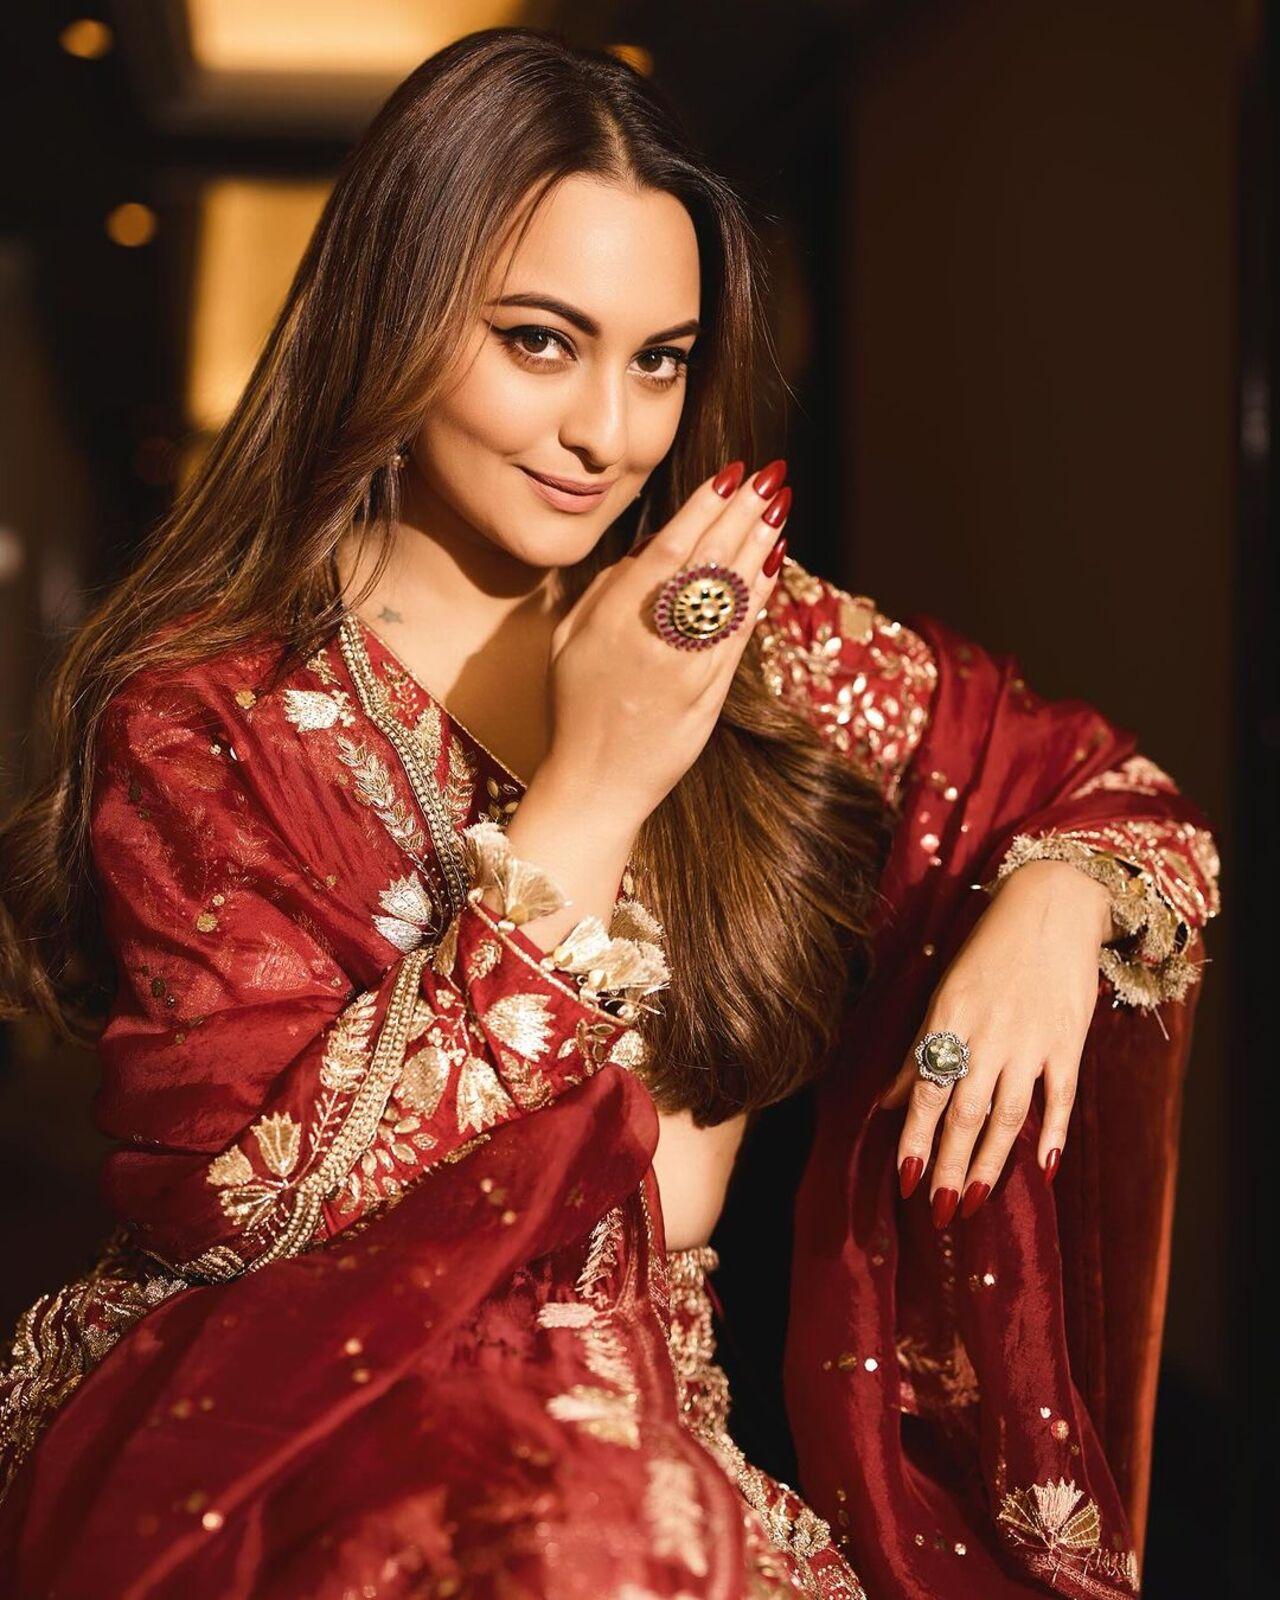 Sonakshi Sinha shared a picture of her dressed in Indian wear while wishing her social media followers 'Eid Mubarak'